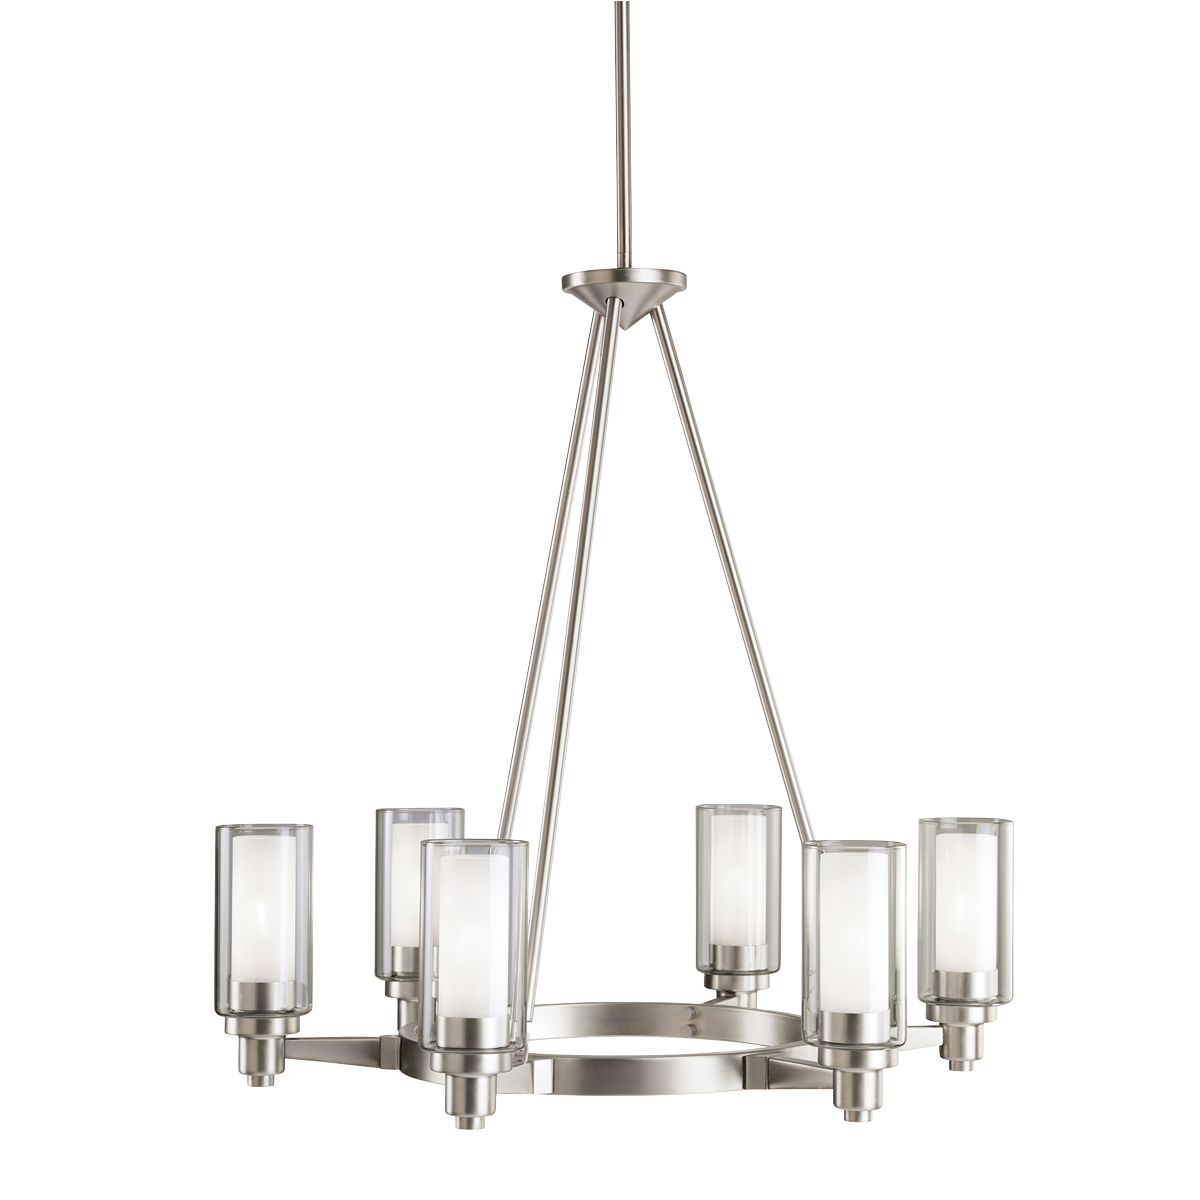 Circolo 6-Light Chandelier in Brushed Nickel, by Kichler, 2344NI